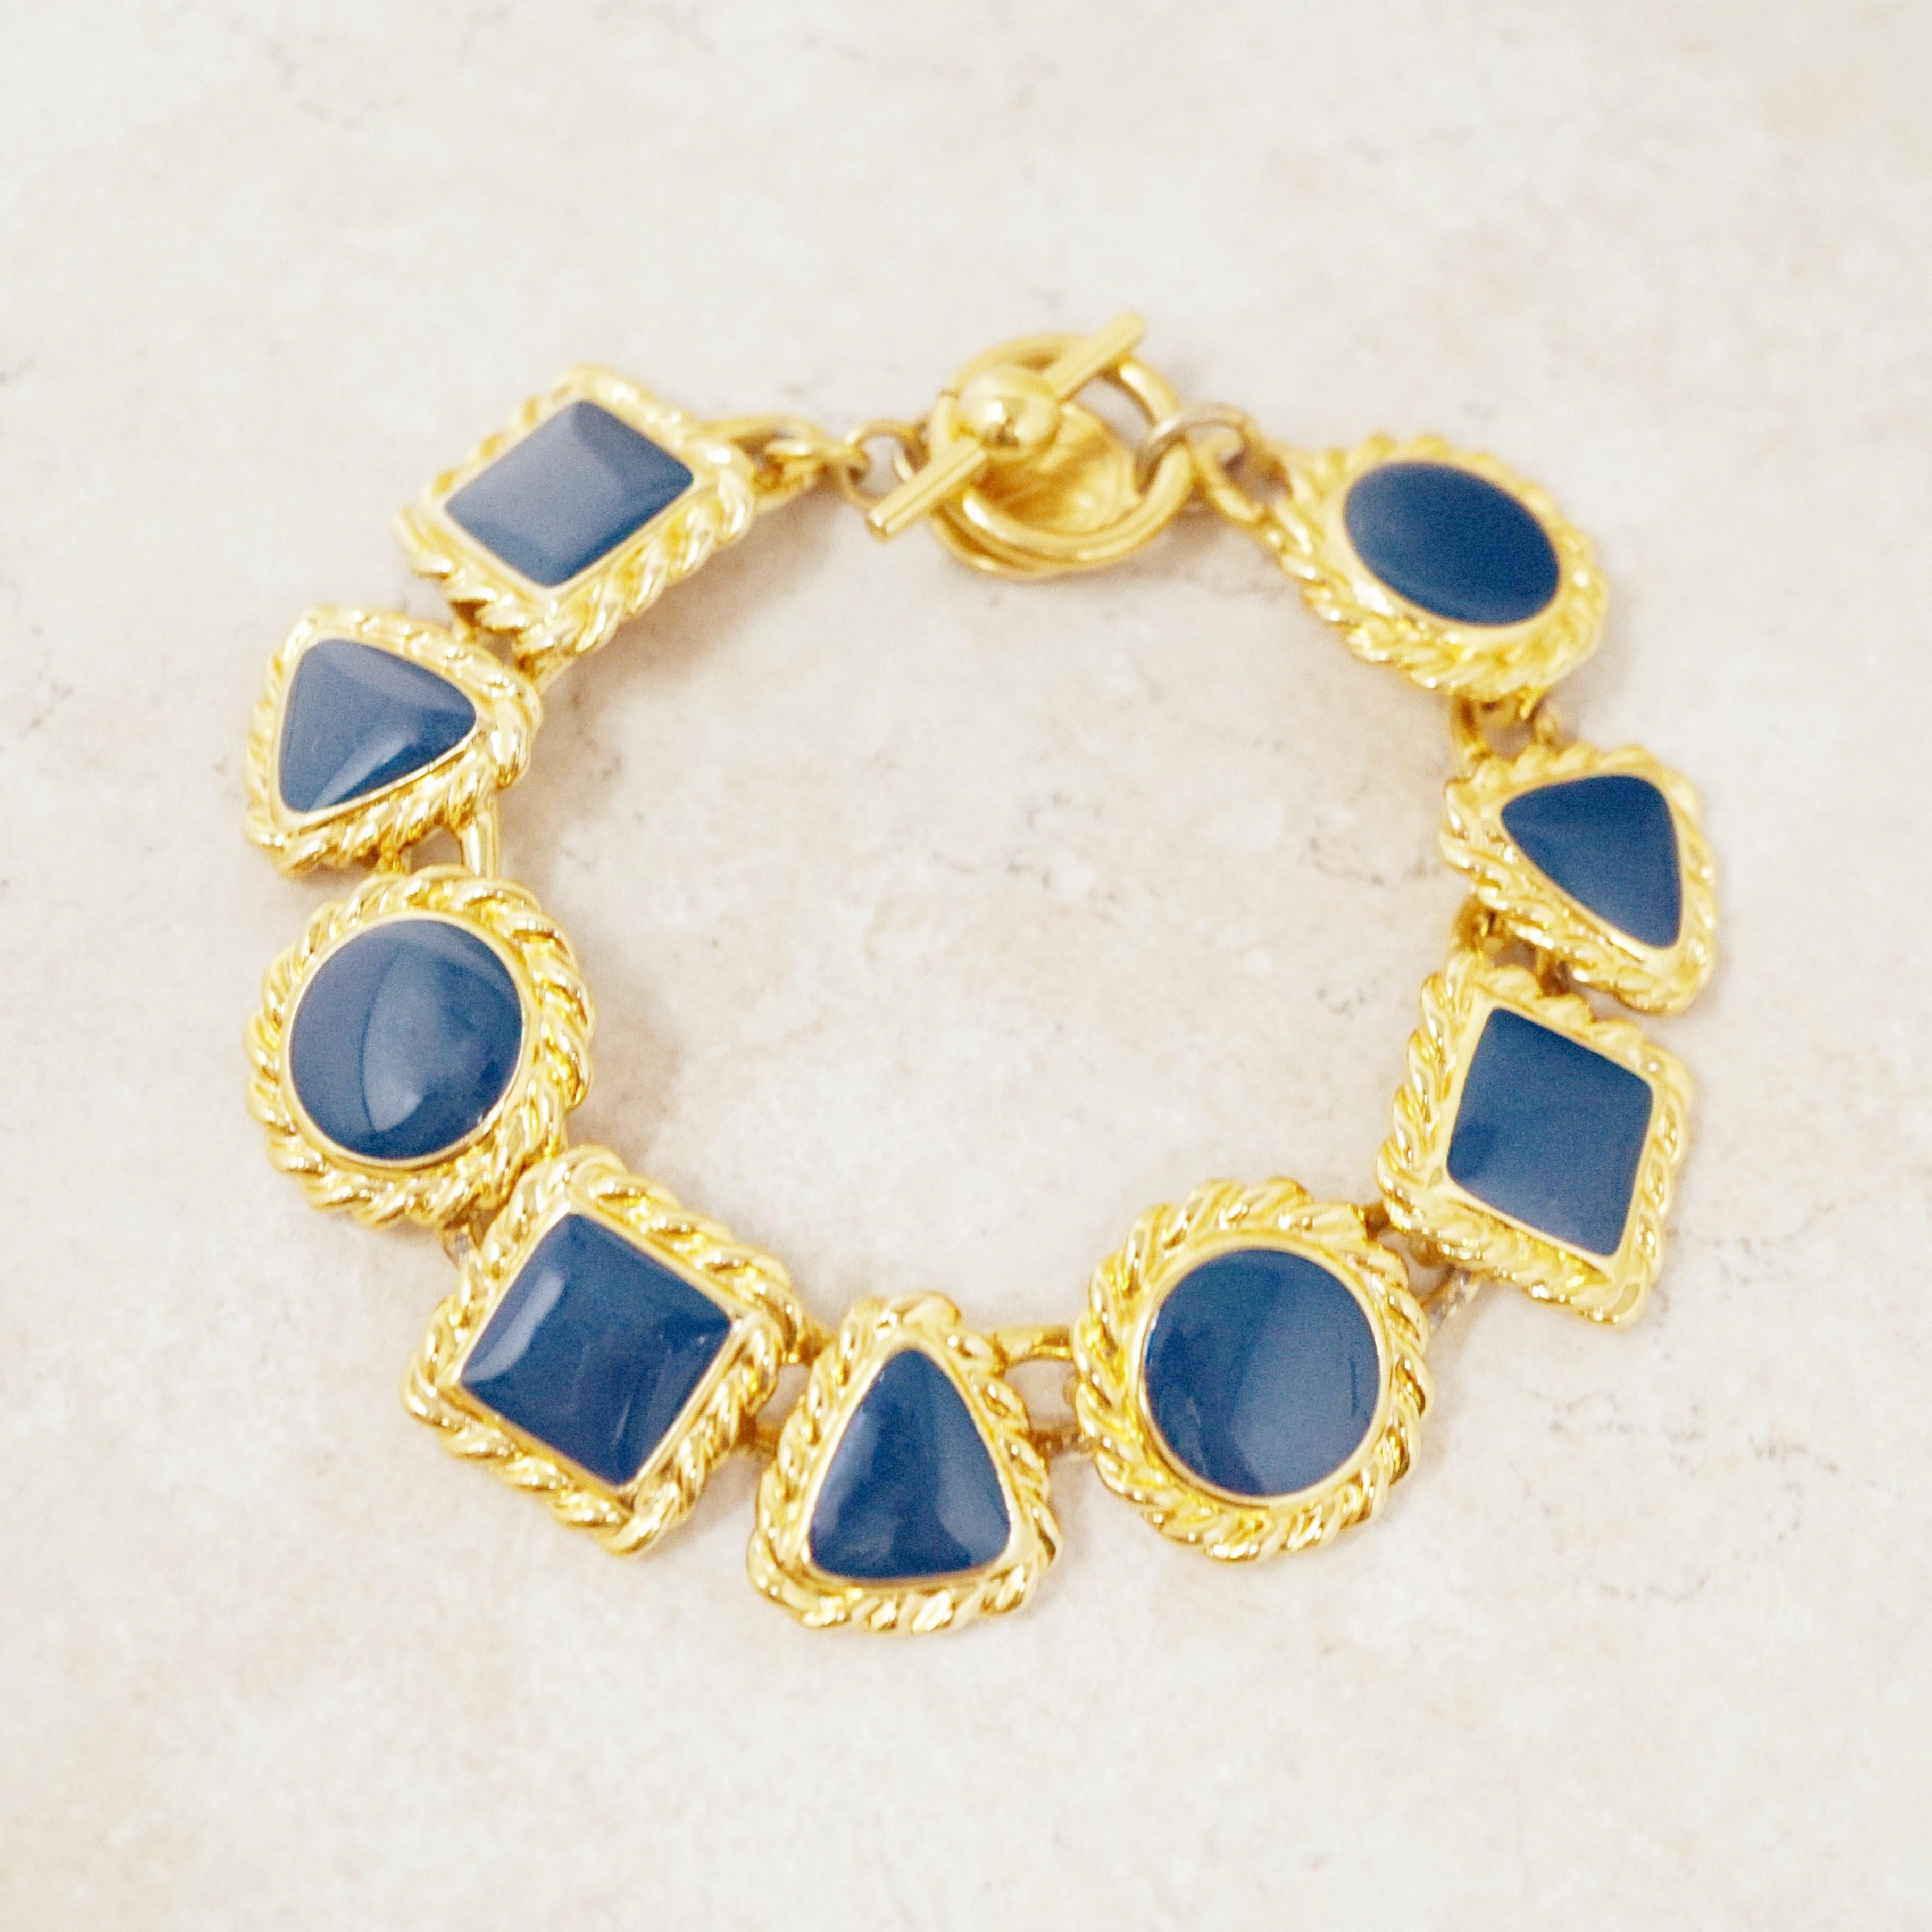 Vintage Gilt & Navy Enamel Geometric Shapes Bracelet by Anne Klein, 1980s In Excellent Condition For Sale In McKinney, TX